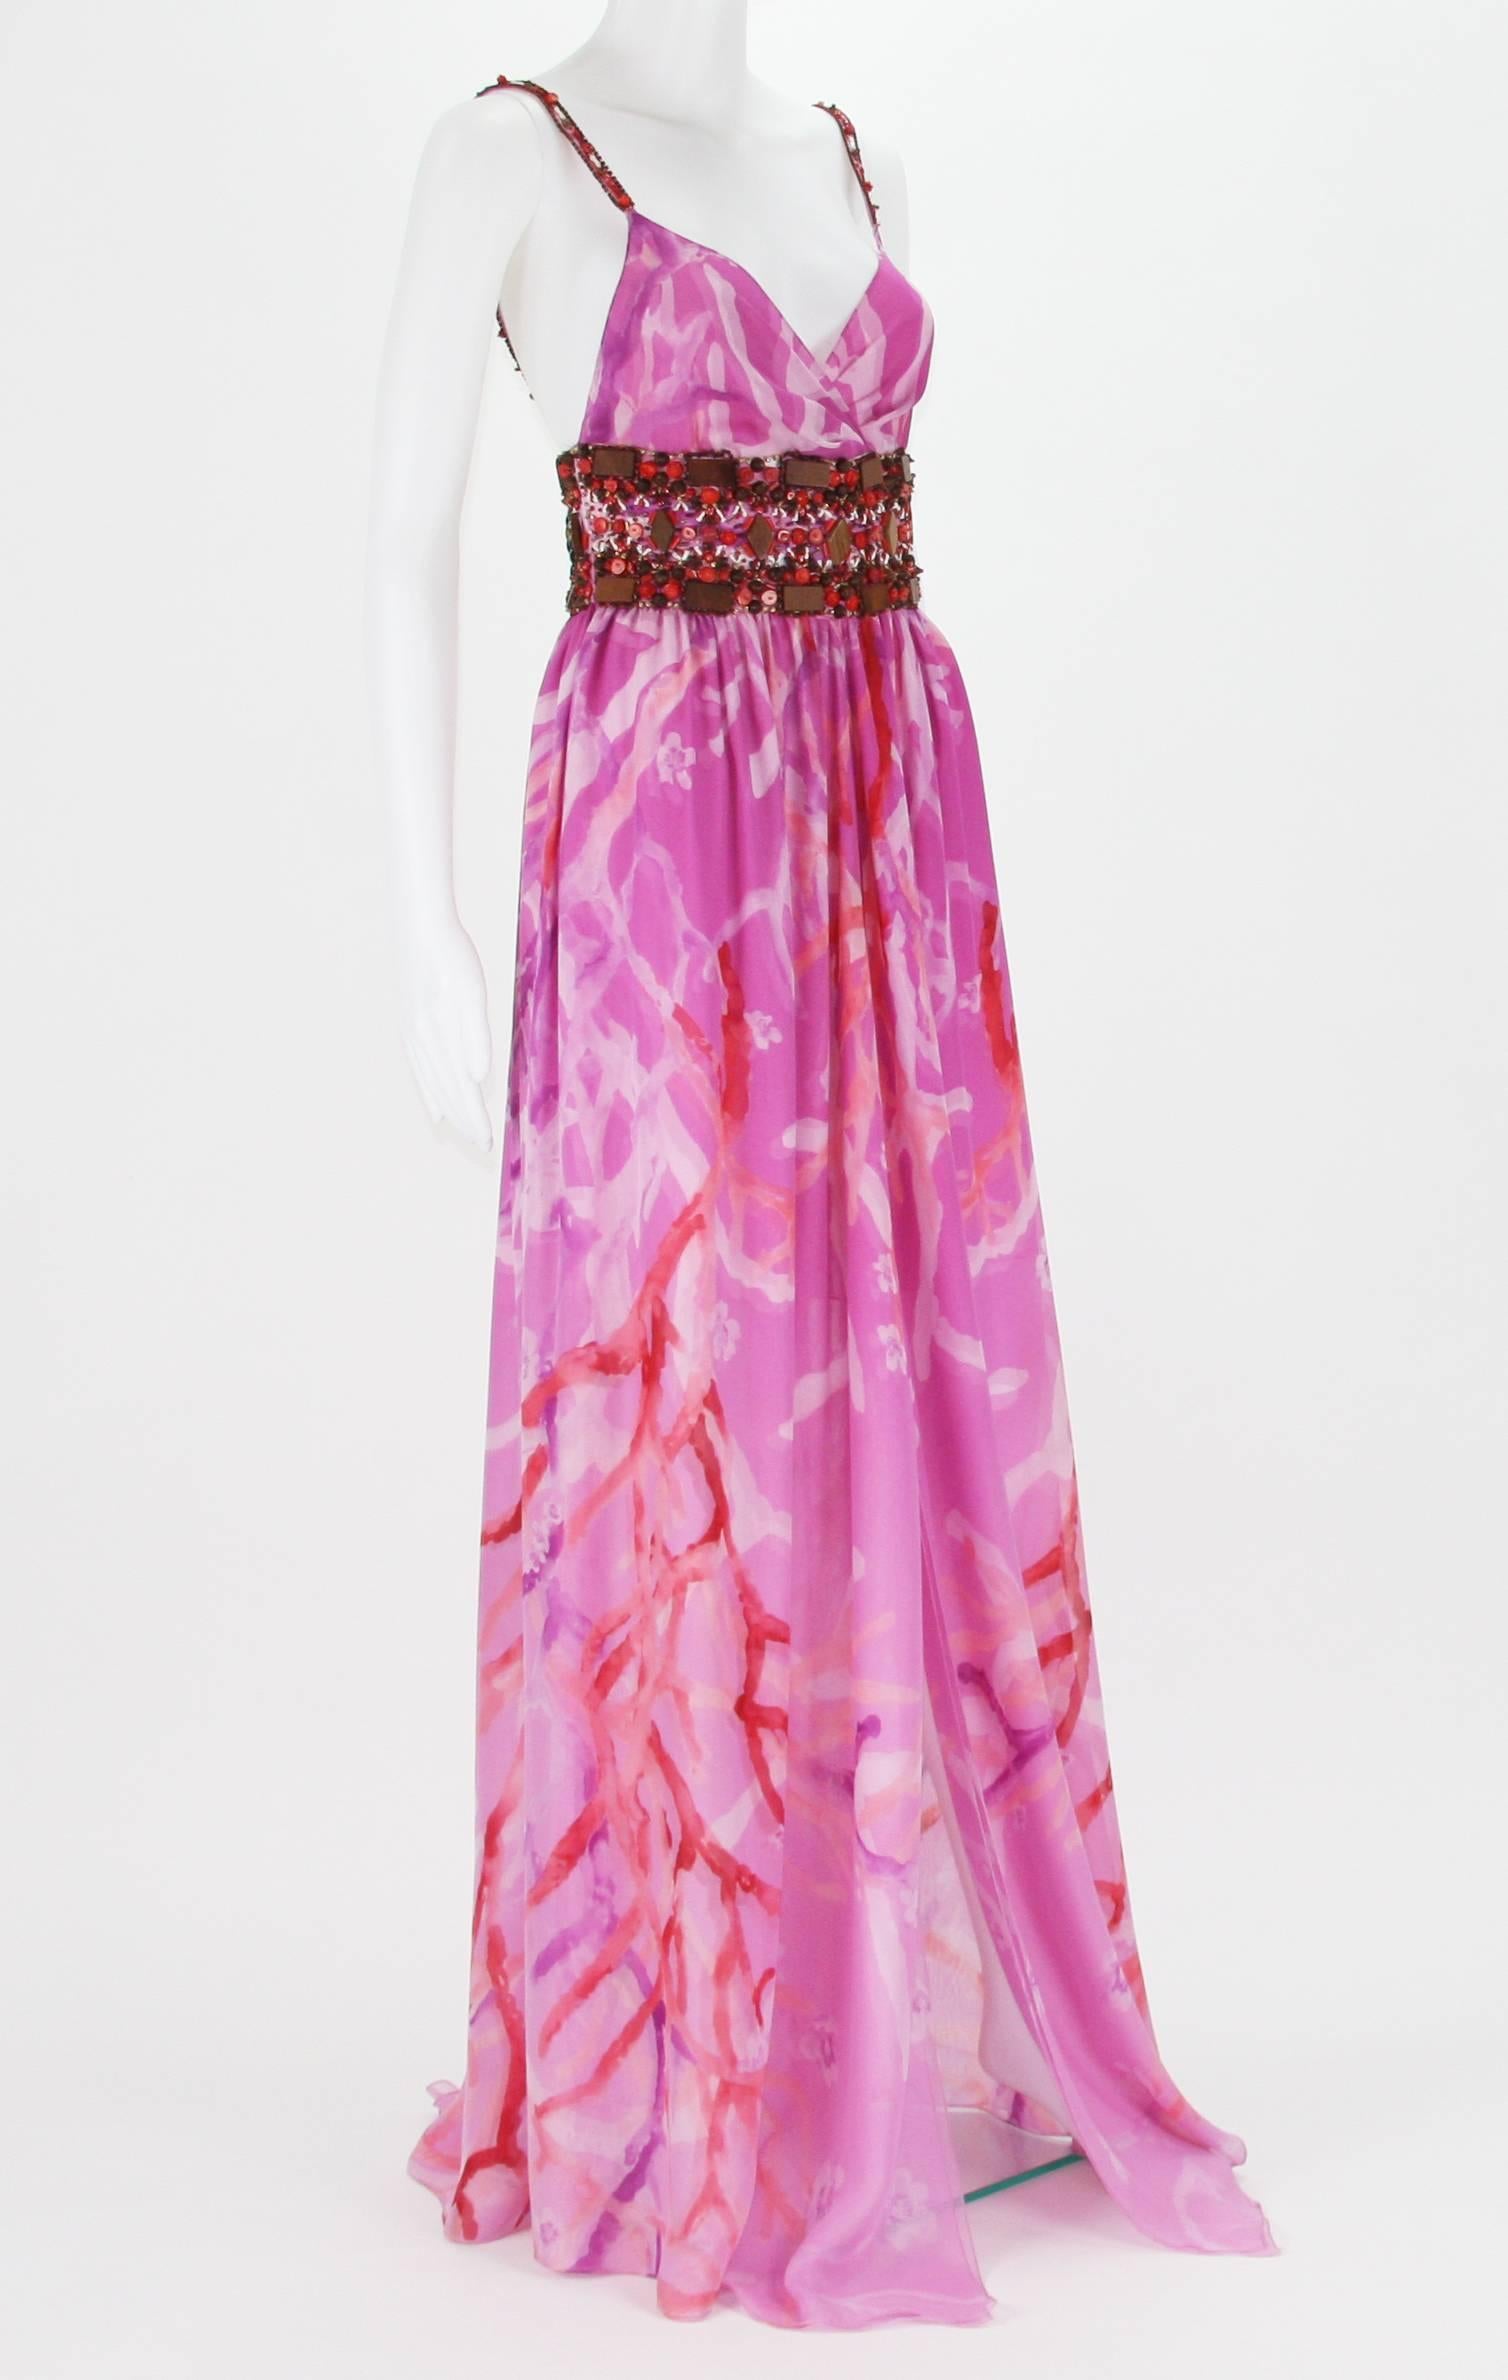 Oscar de la Renta Silk Embellished Pink Dress
Resort 2006
Designer size - 6
100% Silk, Coral Print
Beads Embellishment at Waist and Straps, Fully Lined in Same Fabric ( double layered)
Measurements: Length - 61 inch, Waist - 28 inches.
Made in